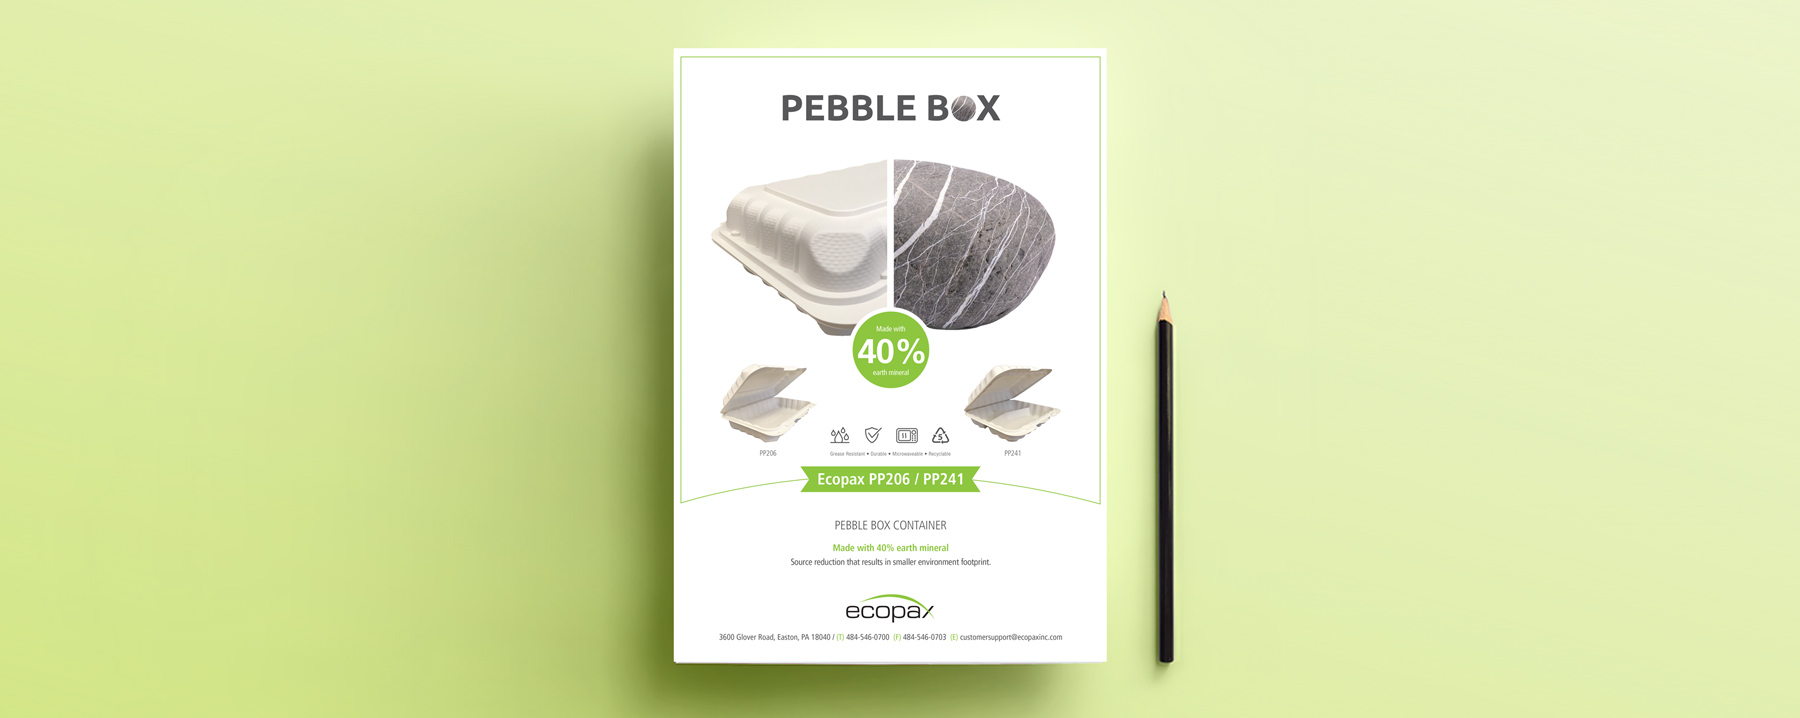 Pebble Box sale sheet featuring half ecopax product half quality stone as metaphor with a black pancil on the side